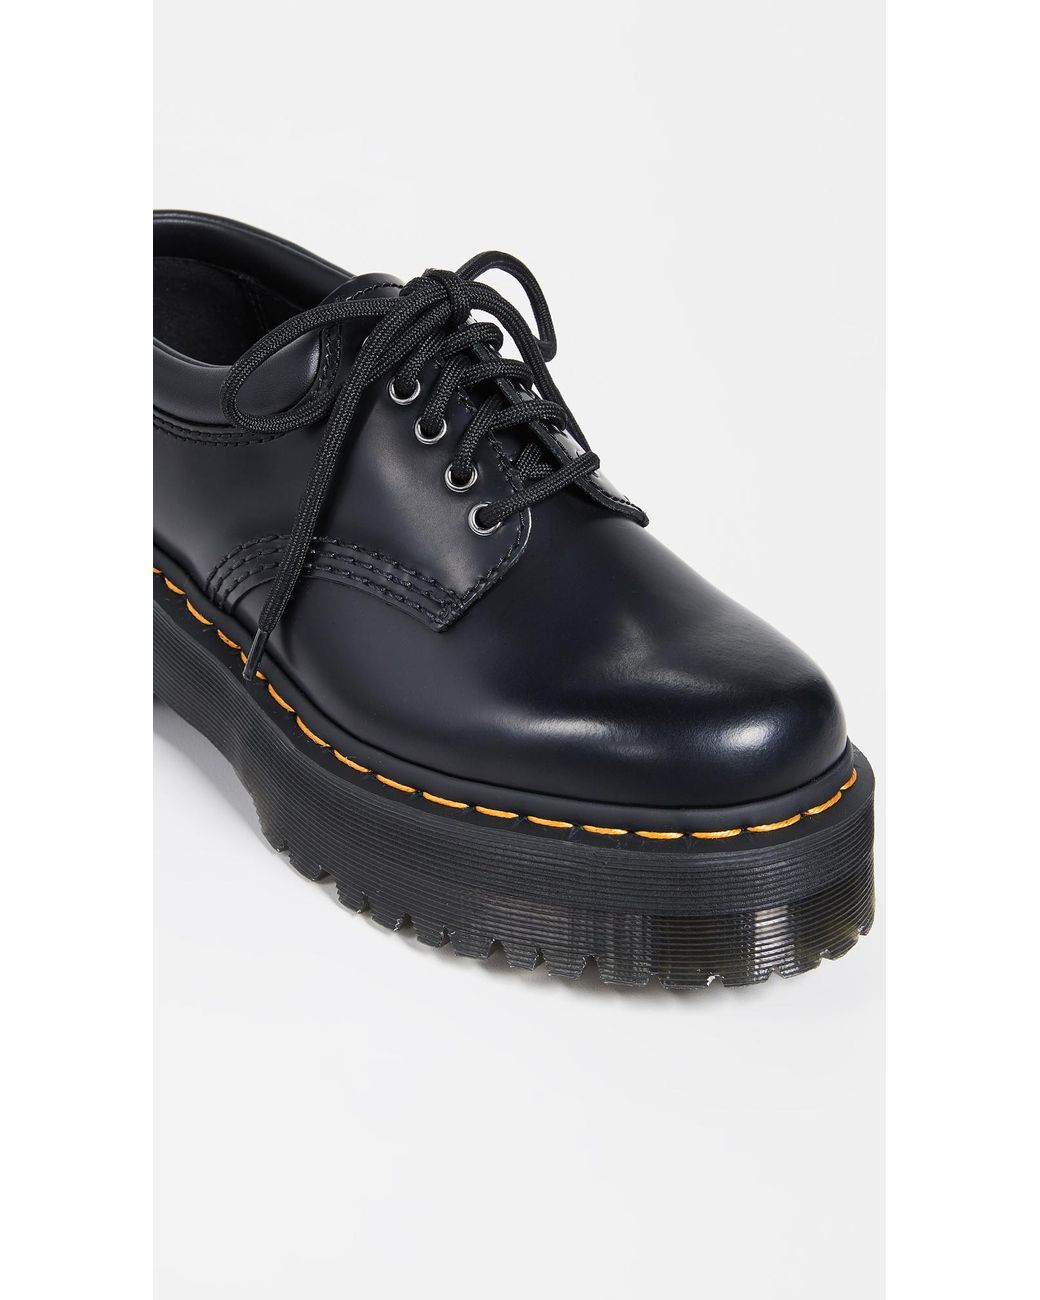 Dr. Martens Leather 8053 Quad 5 Tie Shoes in Black | Lyst